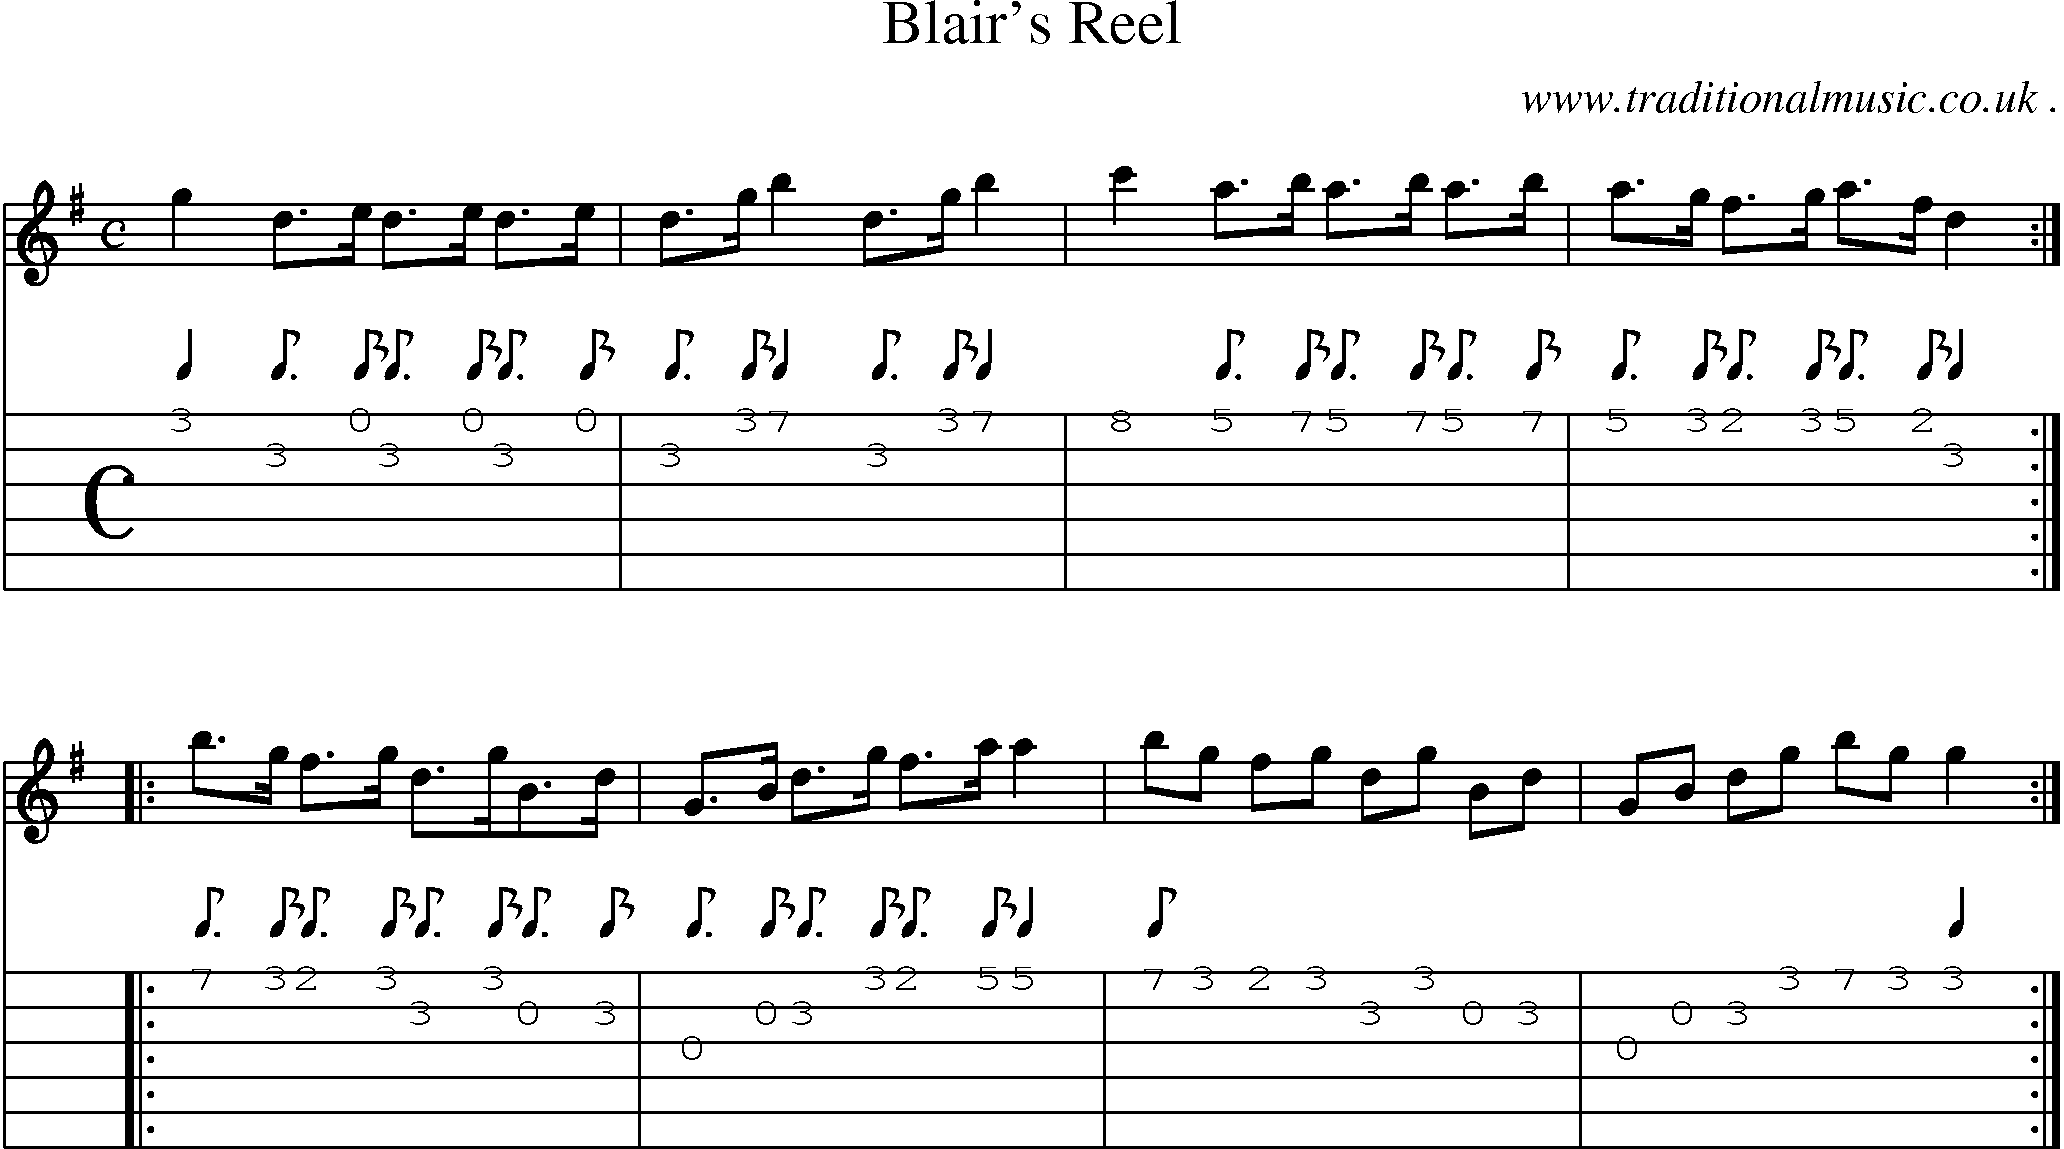 Sheet-Music and Guitar Tabs for Blairs Reel